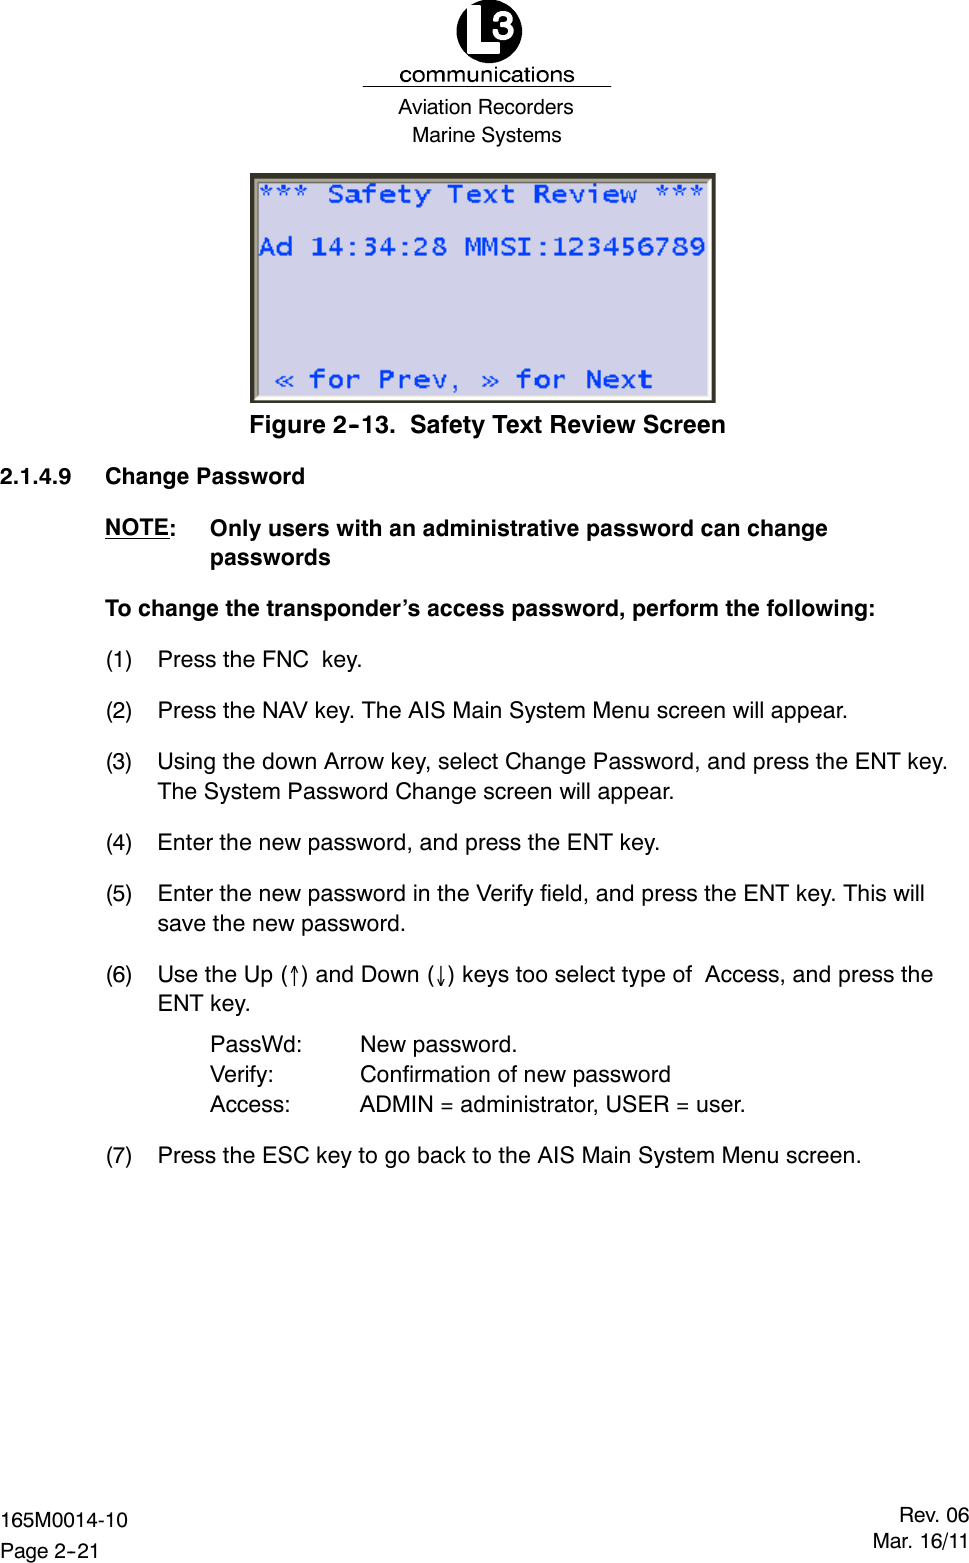 Marine SystemsAviation RecordersRev. 06Mar. 16/11165M0014-10Page 2--21Figure 2--13. Safety Text Review Screen2.1.4.9 Change PasswordNOTE: Only users with an administrative password can changepasswordsTo change the transponder’s access password, perform the following:(1) Press the FNC key.(2) Press the NAV key. The AIS Main System Menu screen will appear.(3) Using the down Arrow key, select Change Password, and press the ENT key.The System Password Change screen will appear.(4) Enter the new password, and press the ENT key.(5) Enter the new password in the Verify field, and press the ENT key. This willsave the new password.(6) UsetheUp() and Down () keys too select type of Access, and press theENT key.PassWd: New password.Verify: Confirmation of new passwordAccess: ADMIN = administrator, USER = user.(7) Press the ESC key to go back to the AIS Main System Menu screen.